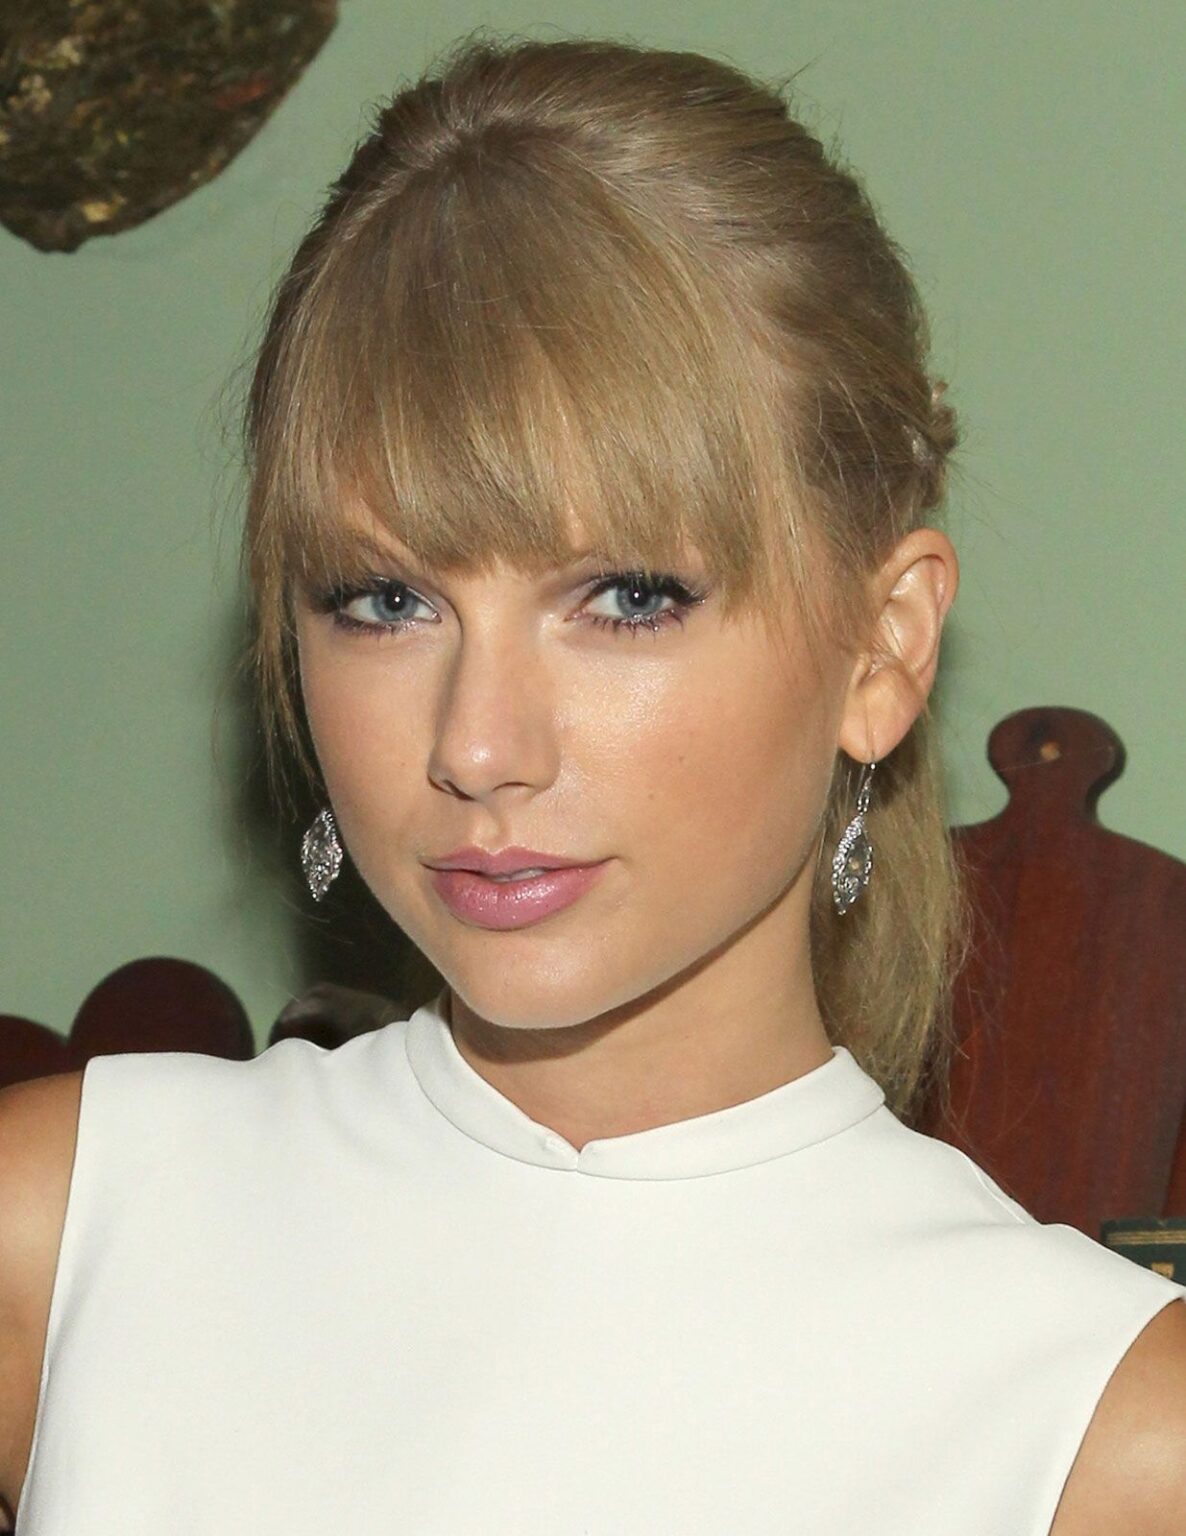 Taylor Swifts Midnights Sells One Million Copies In First 3 Days Theniche